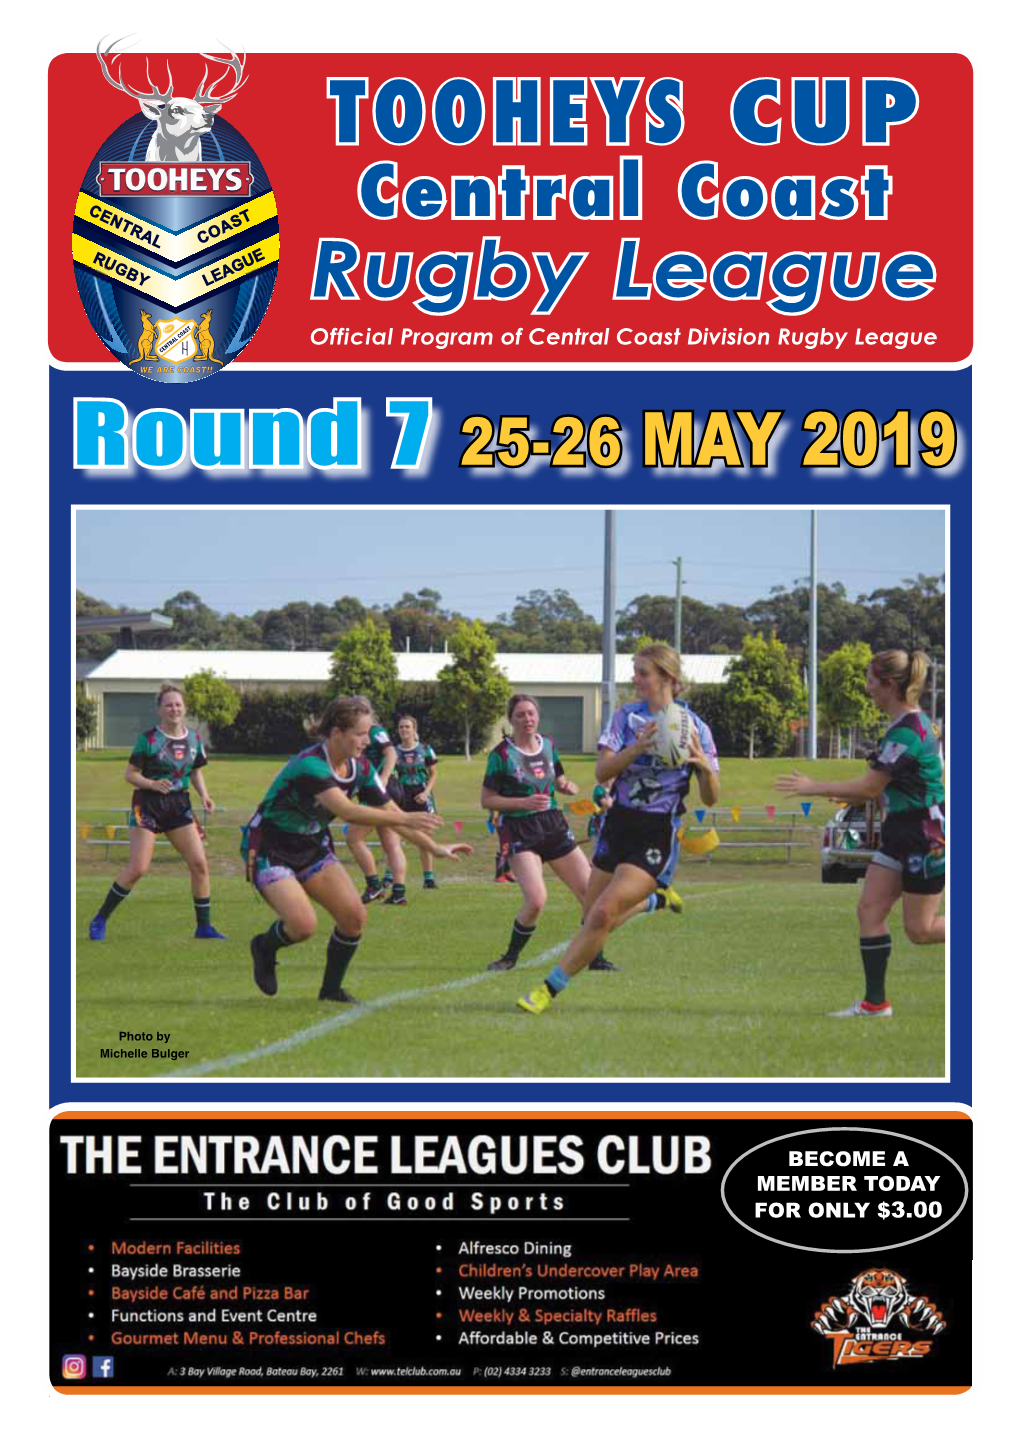 Central Coast Rugby League Official Program of Central Coast Division Rugby League